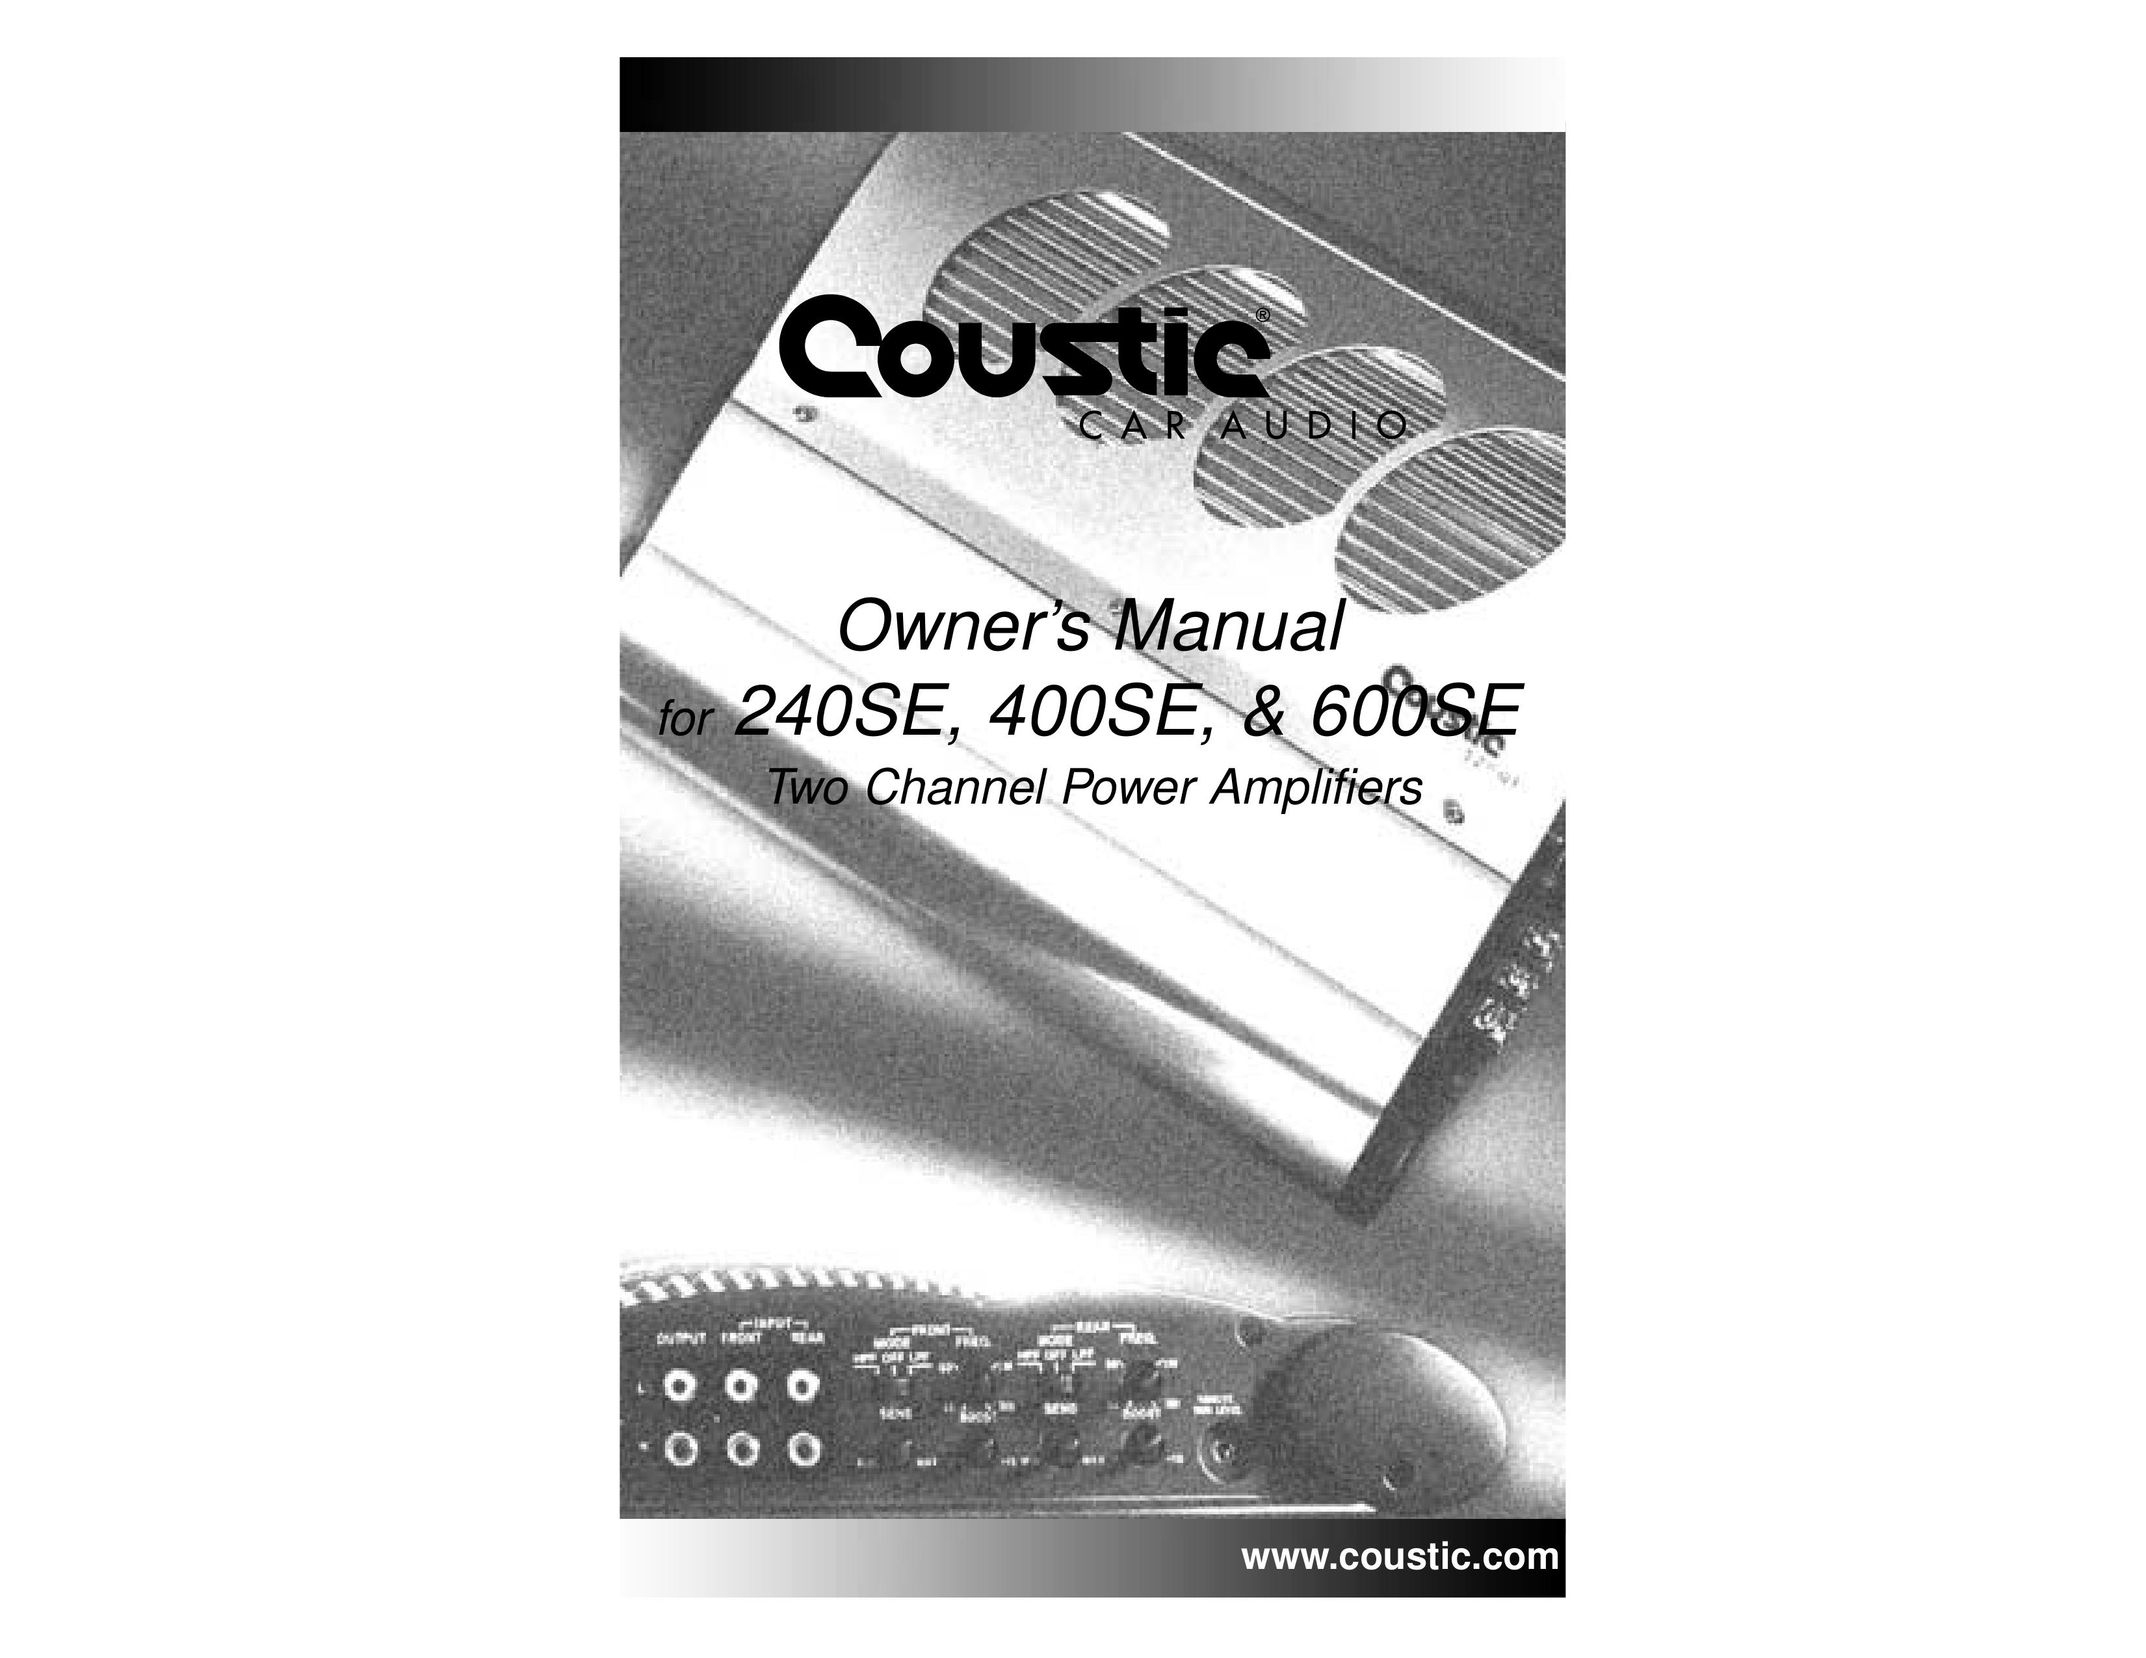 Coustic 240SE Stereo Amplifier User Manual